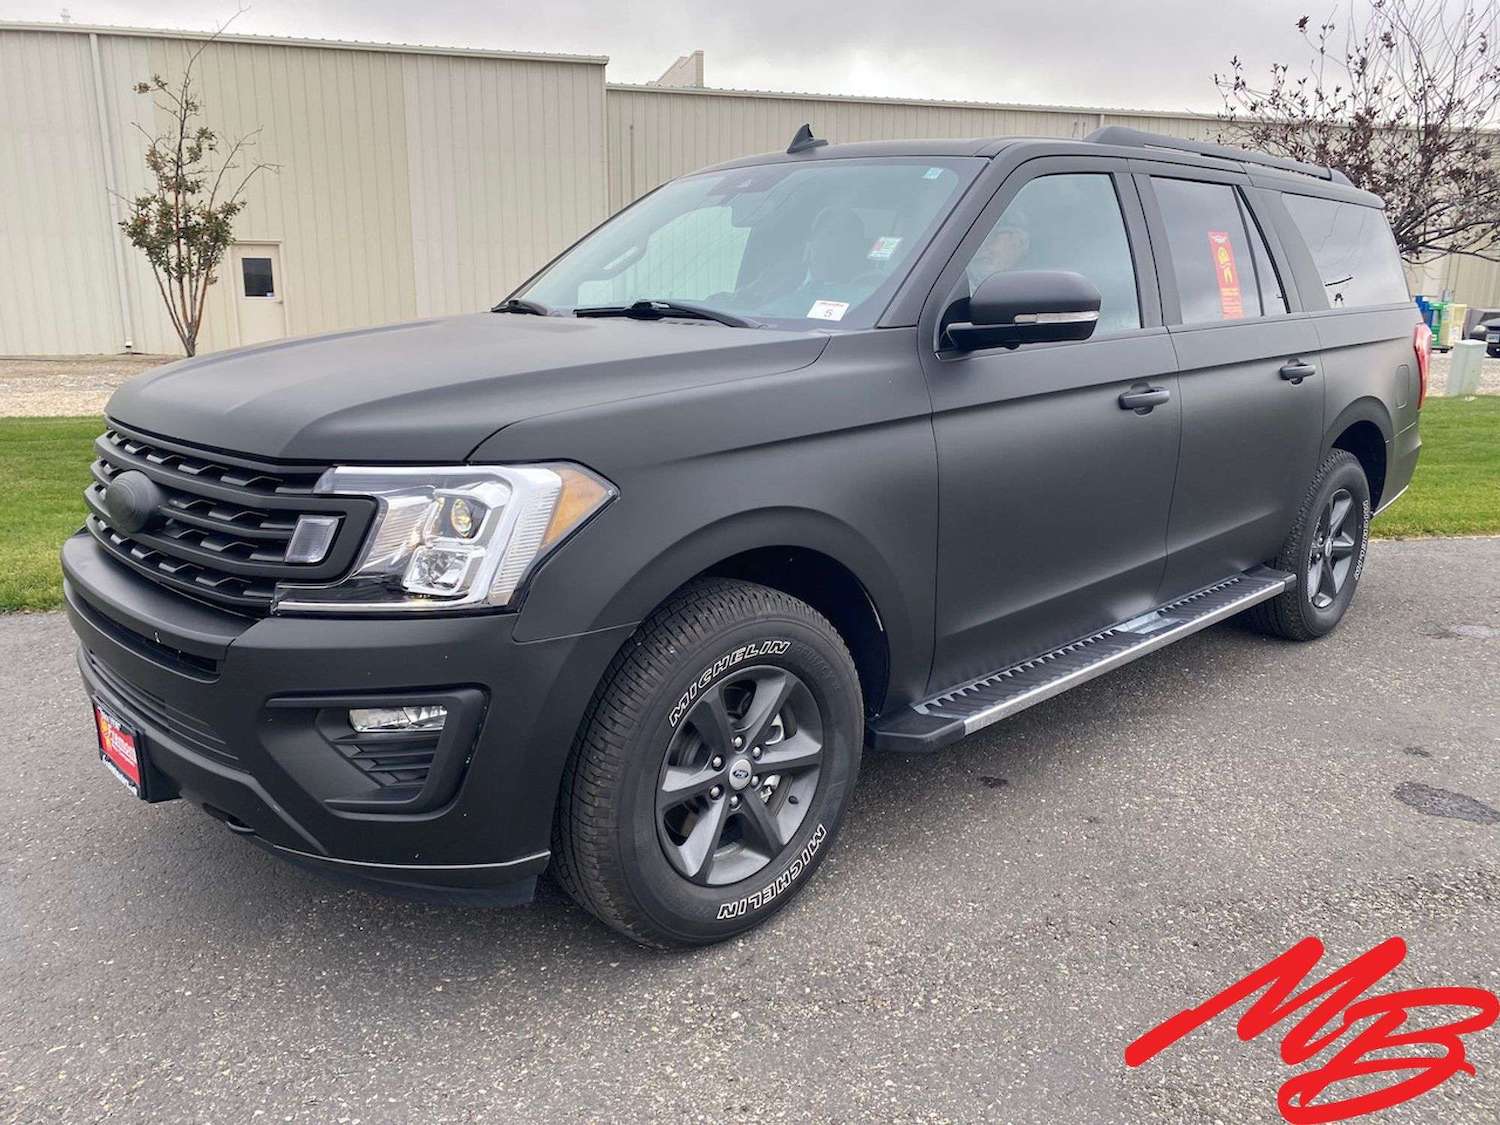 Kanye West's 2020 Ford Expedition XLT Max 4x4 SUV from Cody, Wyoming now up for auction from Musser Bros.